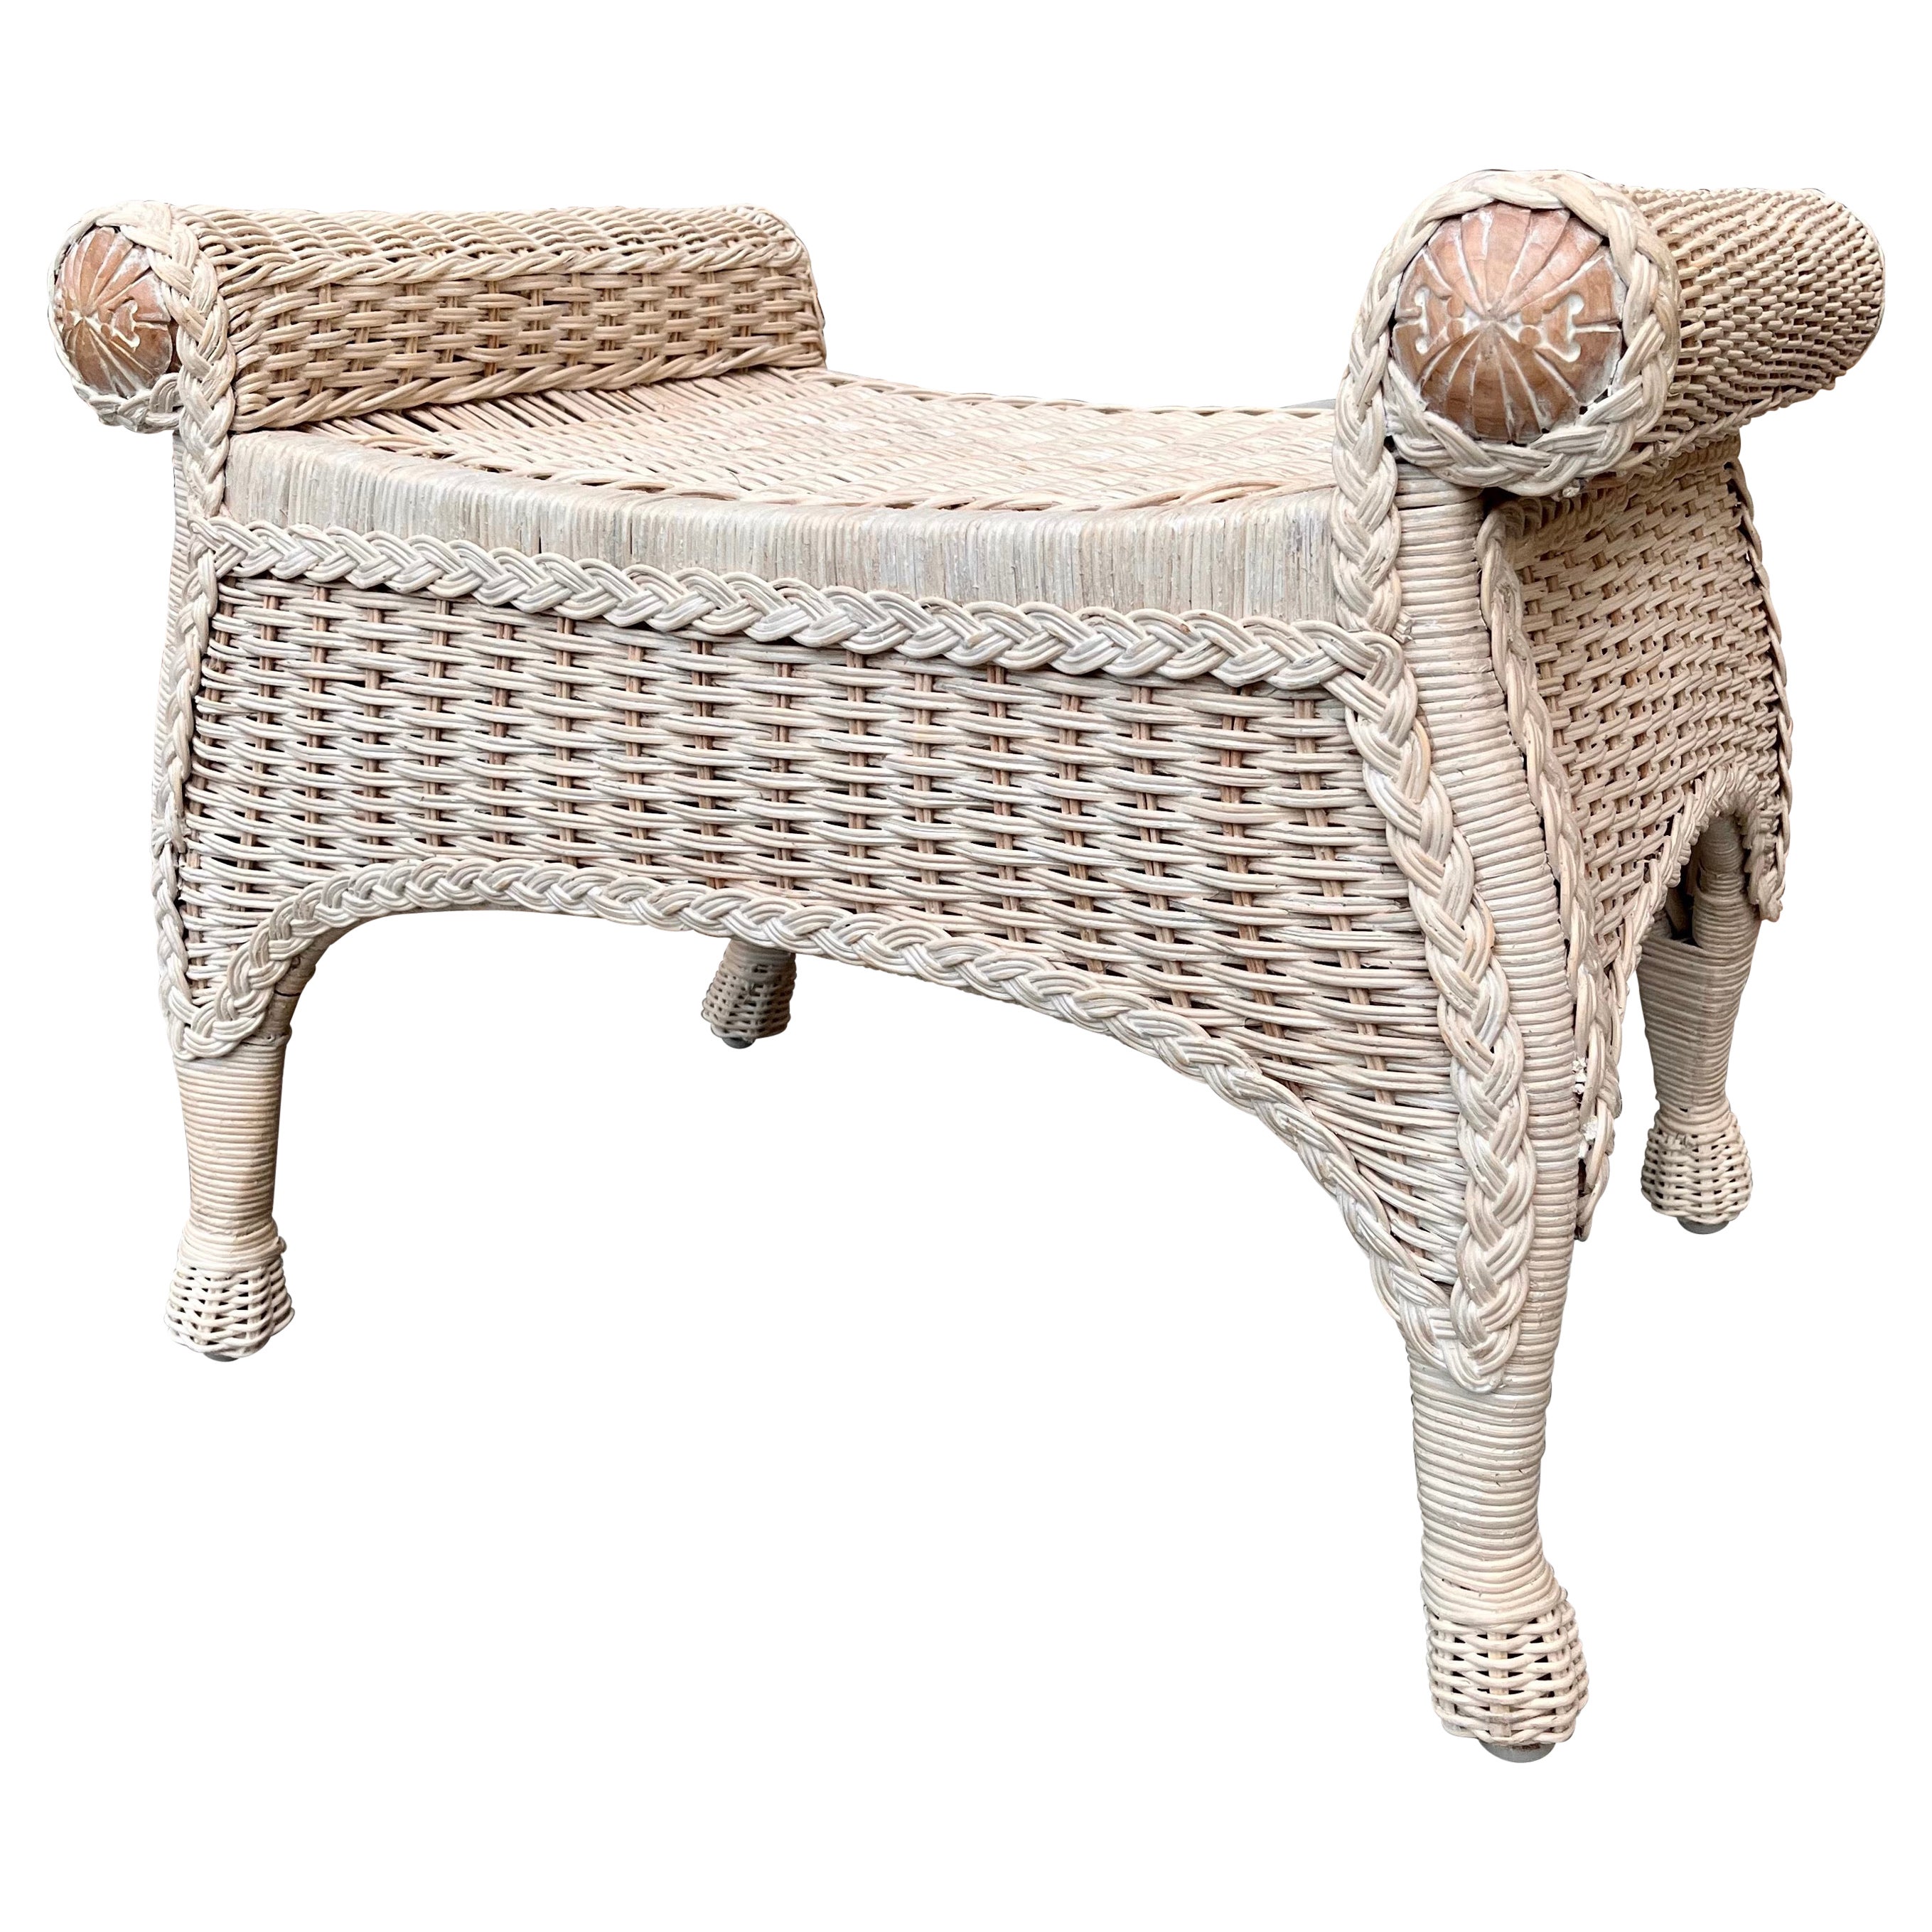 Late 20th Century Boho Chic Coastal Style Rattan Vanity Bench For Sale